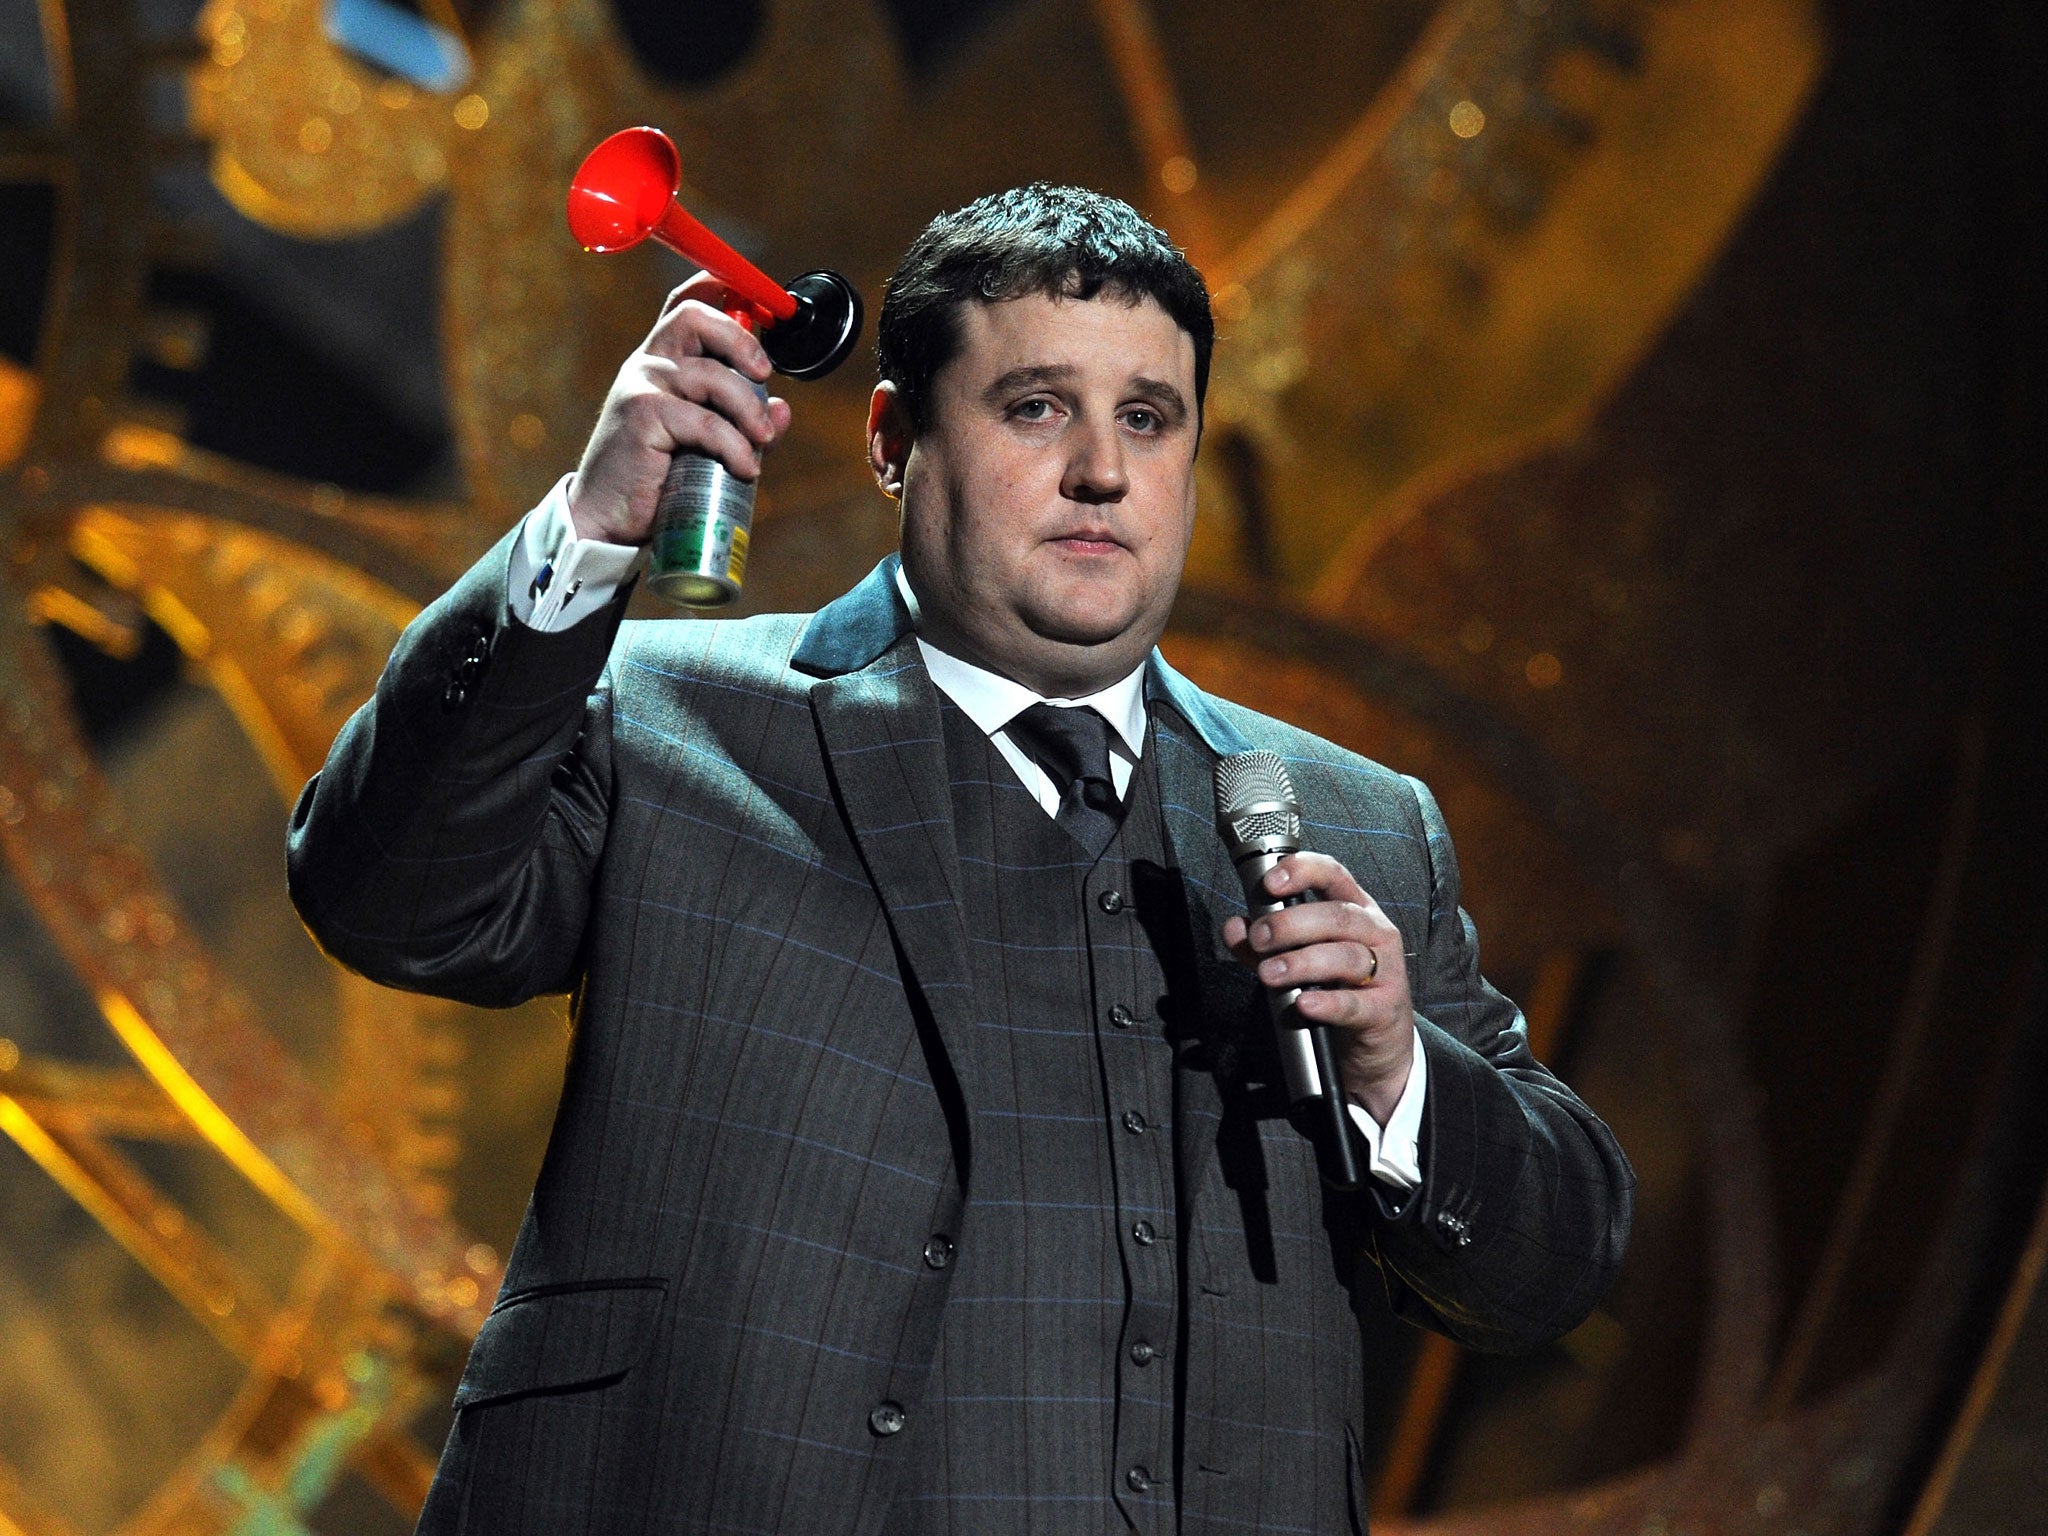 Top gear: Peter Kay will star in new sitcom 'Car Share'